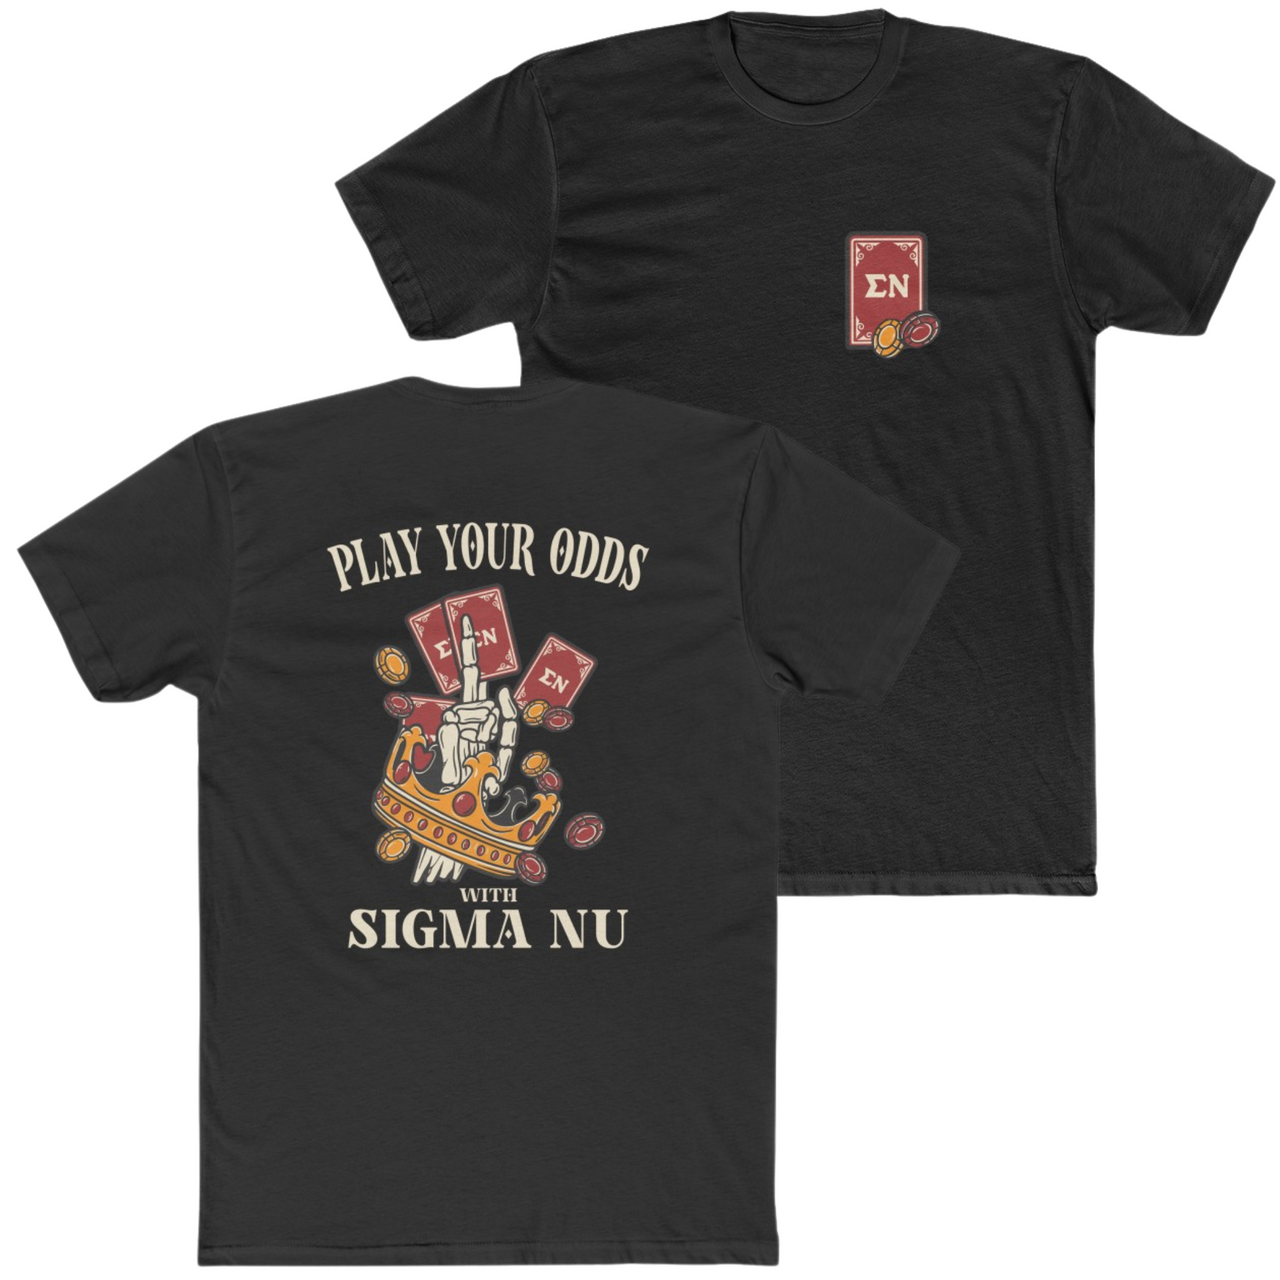 Black Sigma Nu Graphic T-Shirt | Play Your Odds | Sigma Nu Clothing, Apparel and Merchandise